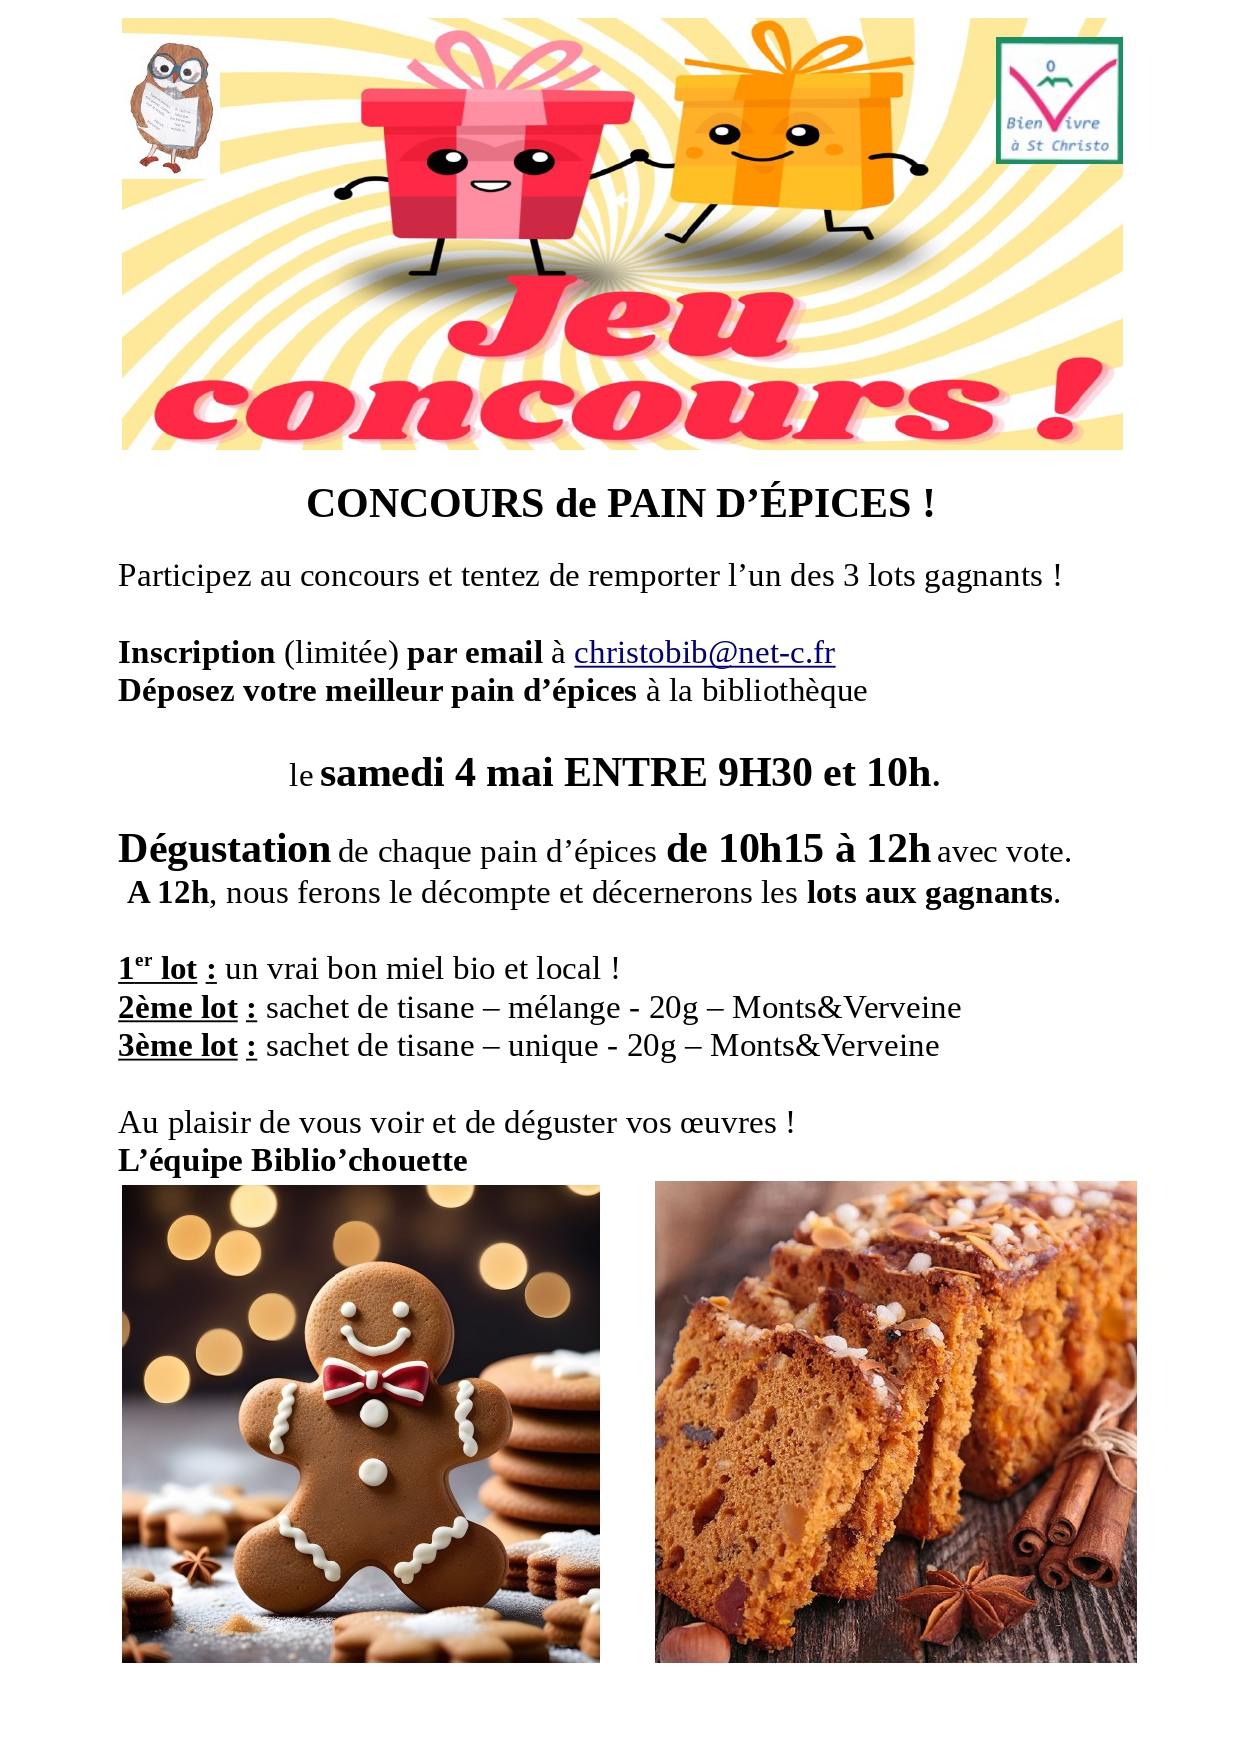 Concours Pain d epices_v2_page-0001.jpg